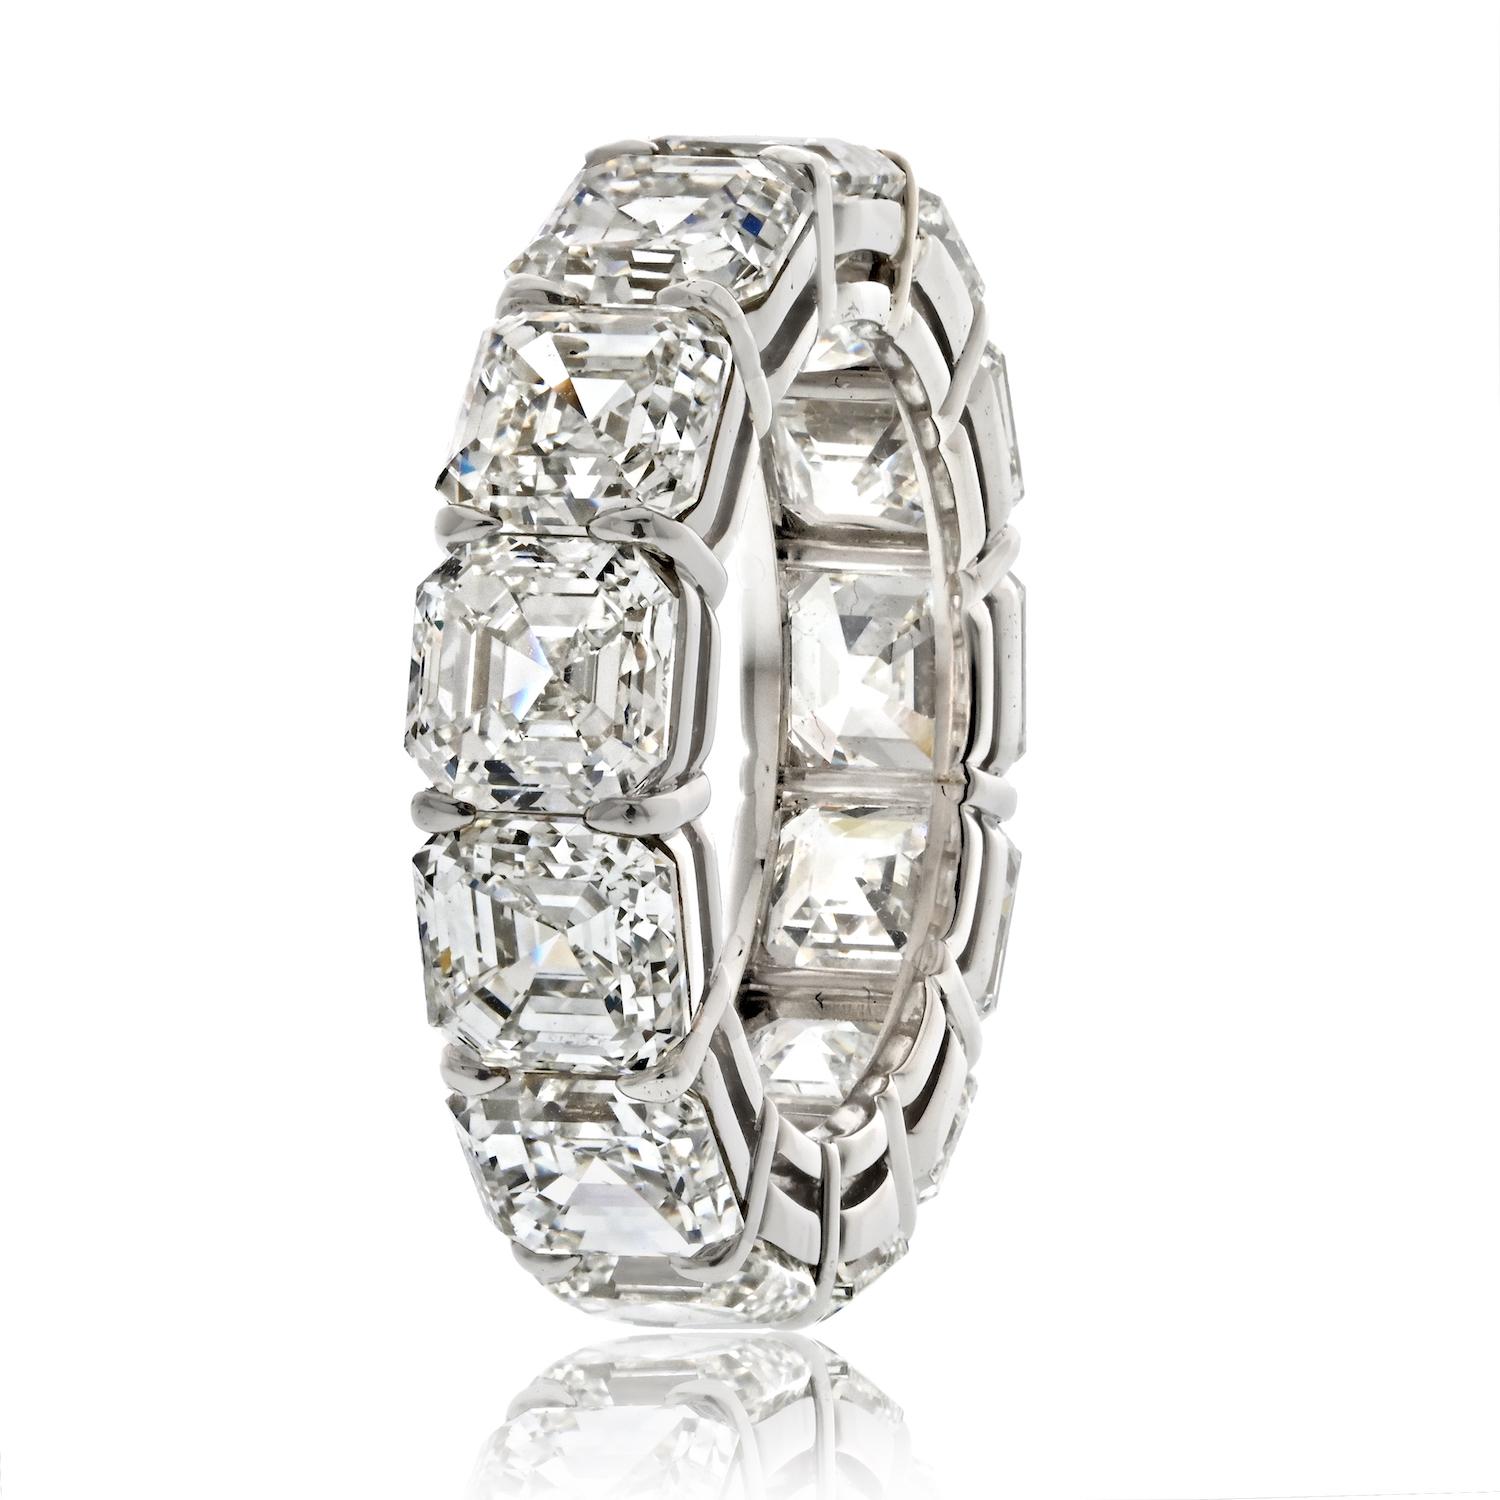 Elegance personified, this platinum eternity band is a true masterpiece. Adorned with a total of 13 exquisite asscher cut diamonds (13.32cttw), each certified by GIA (Gemological Institute of America), this ring is a symbol of sheer luxury. 

The